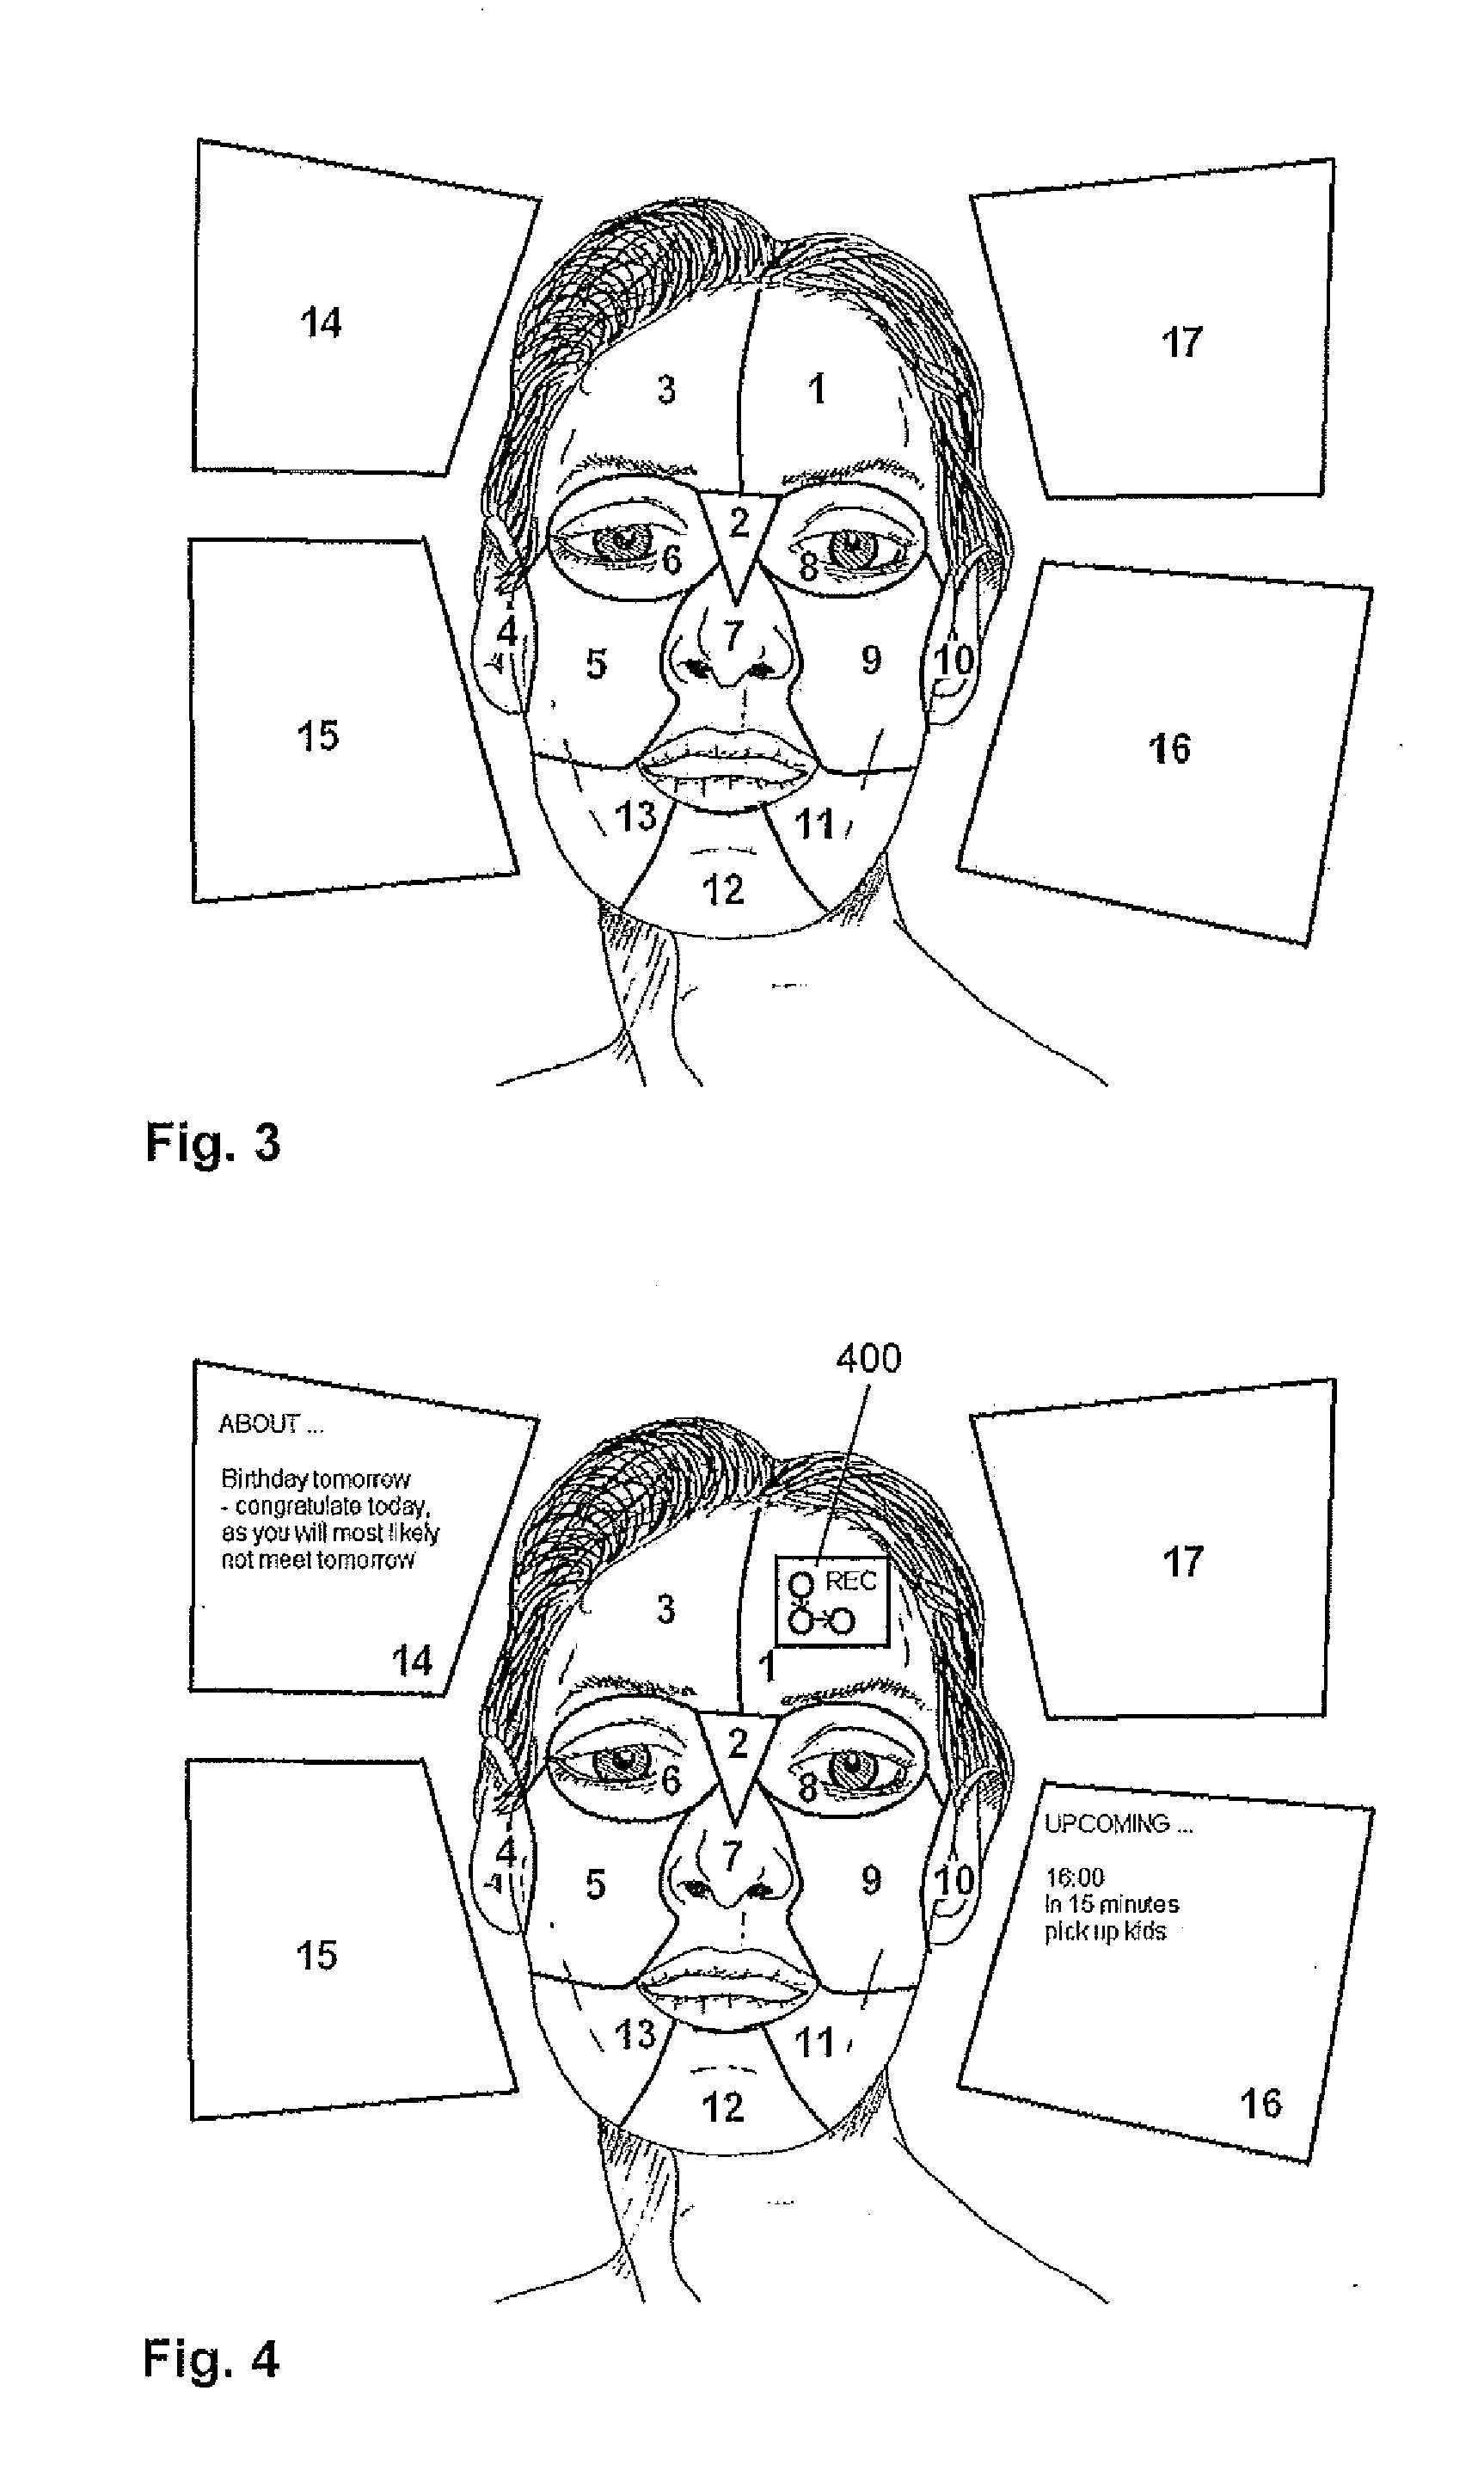 Method for displaying augmentation information in an augmented reality system